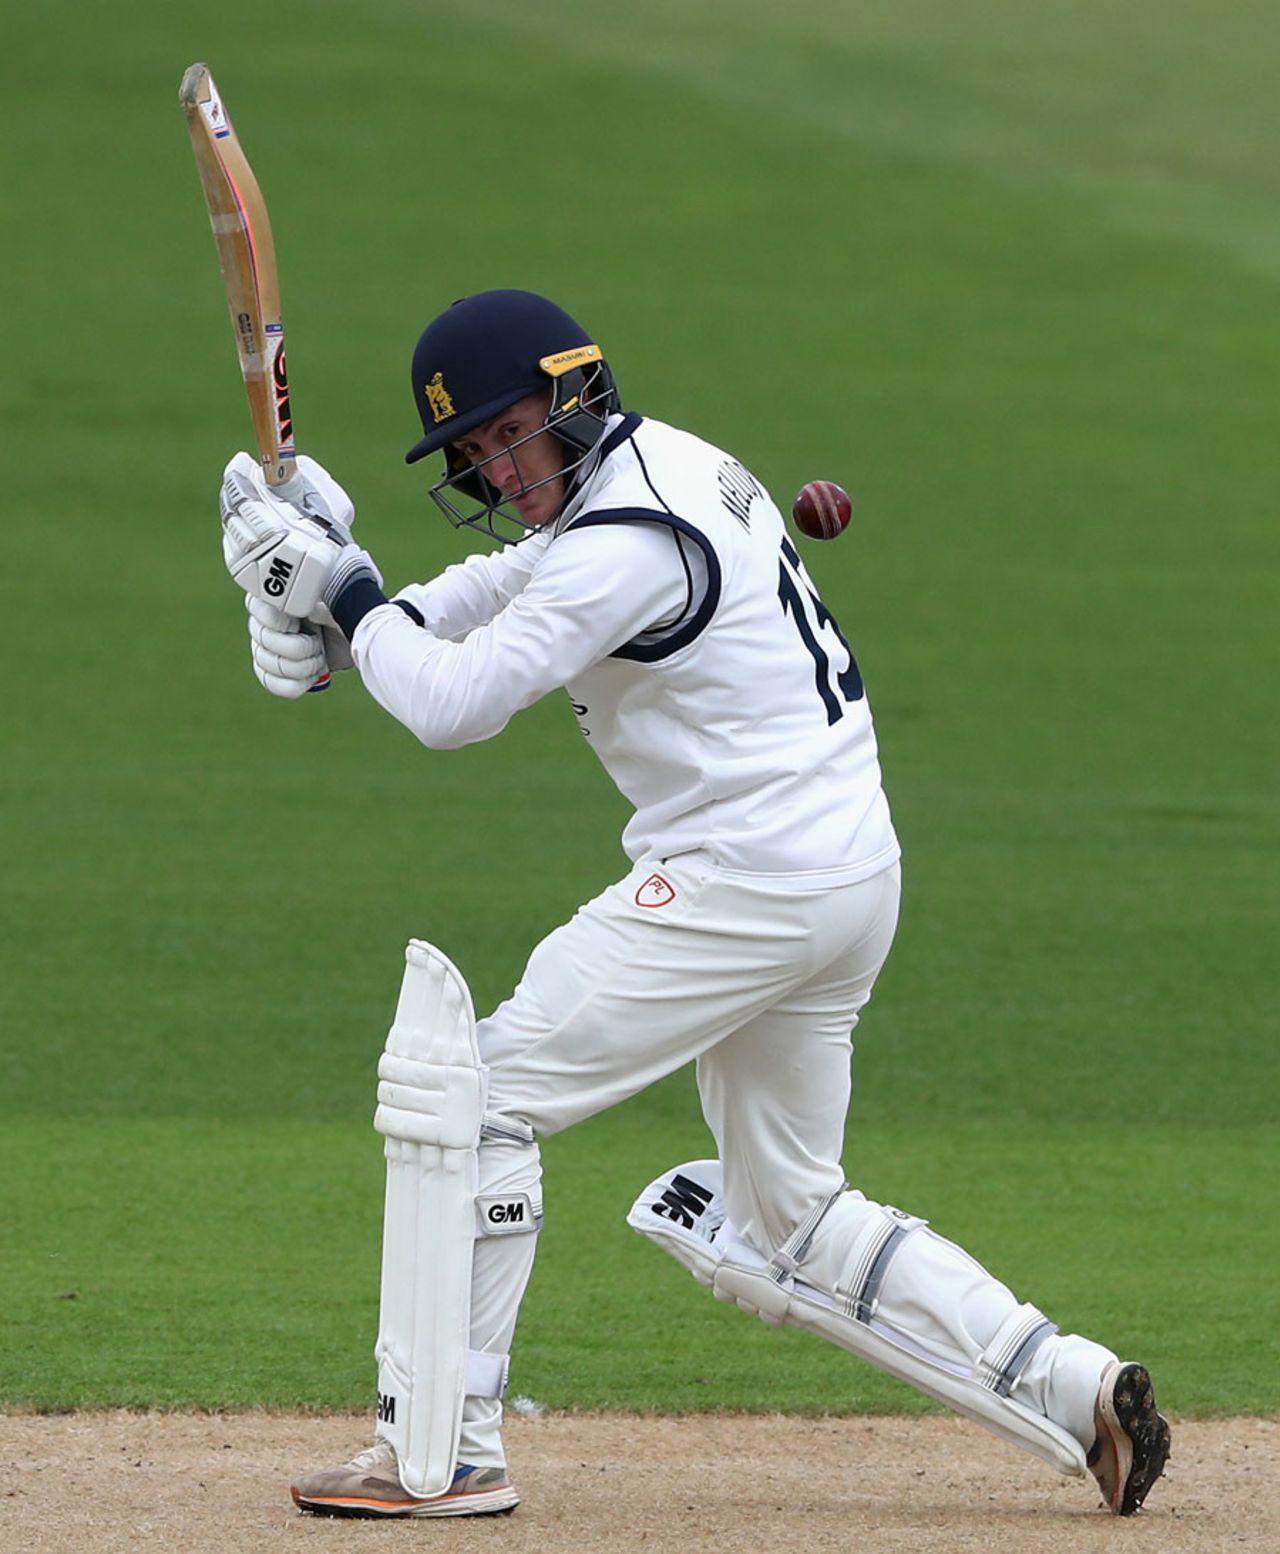 Alex Mellor was opening the batting, Warwickshire v Yorkshire, County Championship, Division One, Edgbaston, 1st day, April 14, 2017